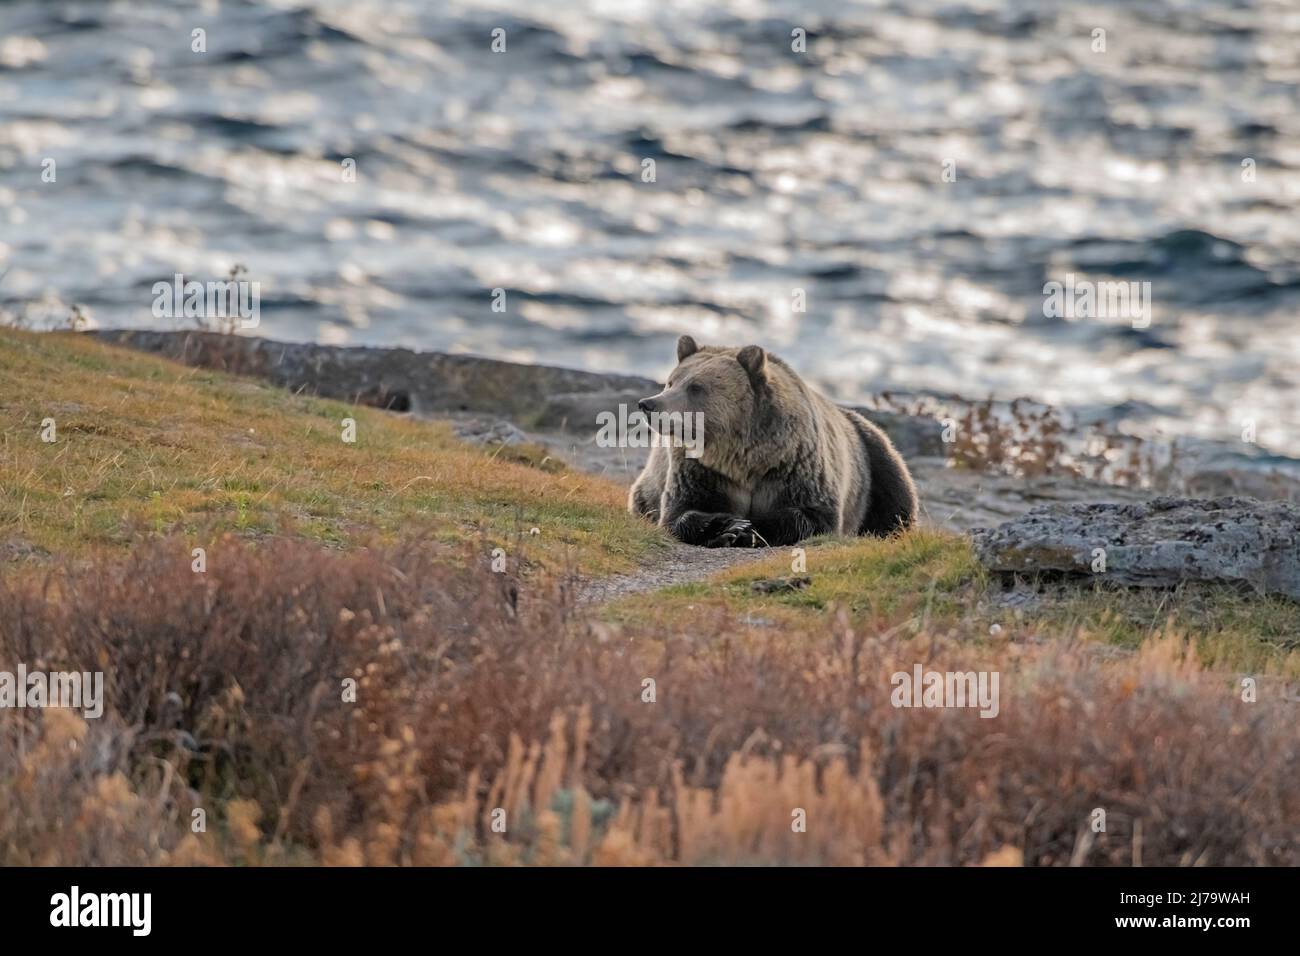 Grizzly Bear (Ursus arctos horribilis) in Yellowstone National Park, Wyoming, USA. Stock Photo